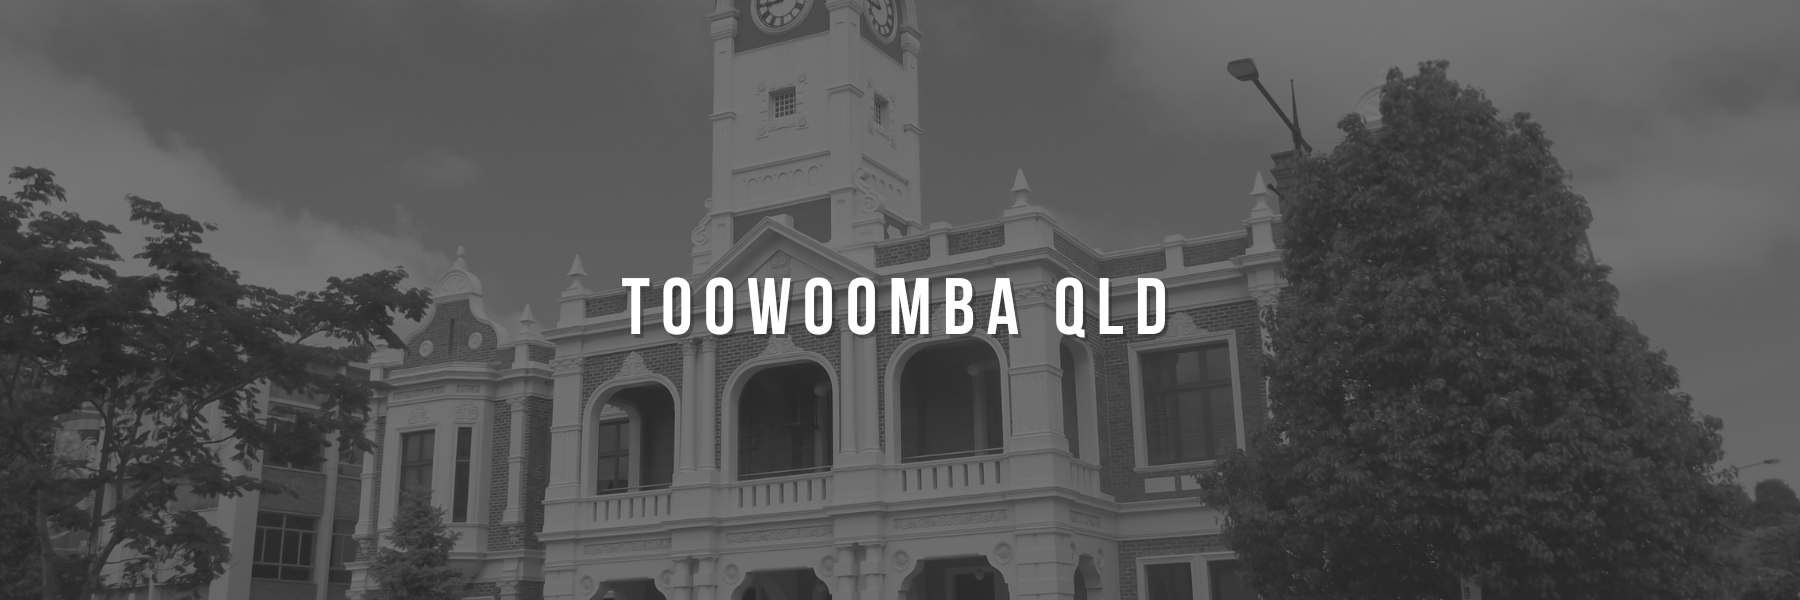 currency exchange agency in Toowoomba